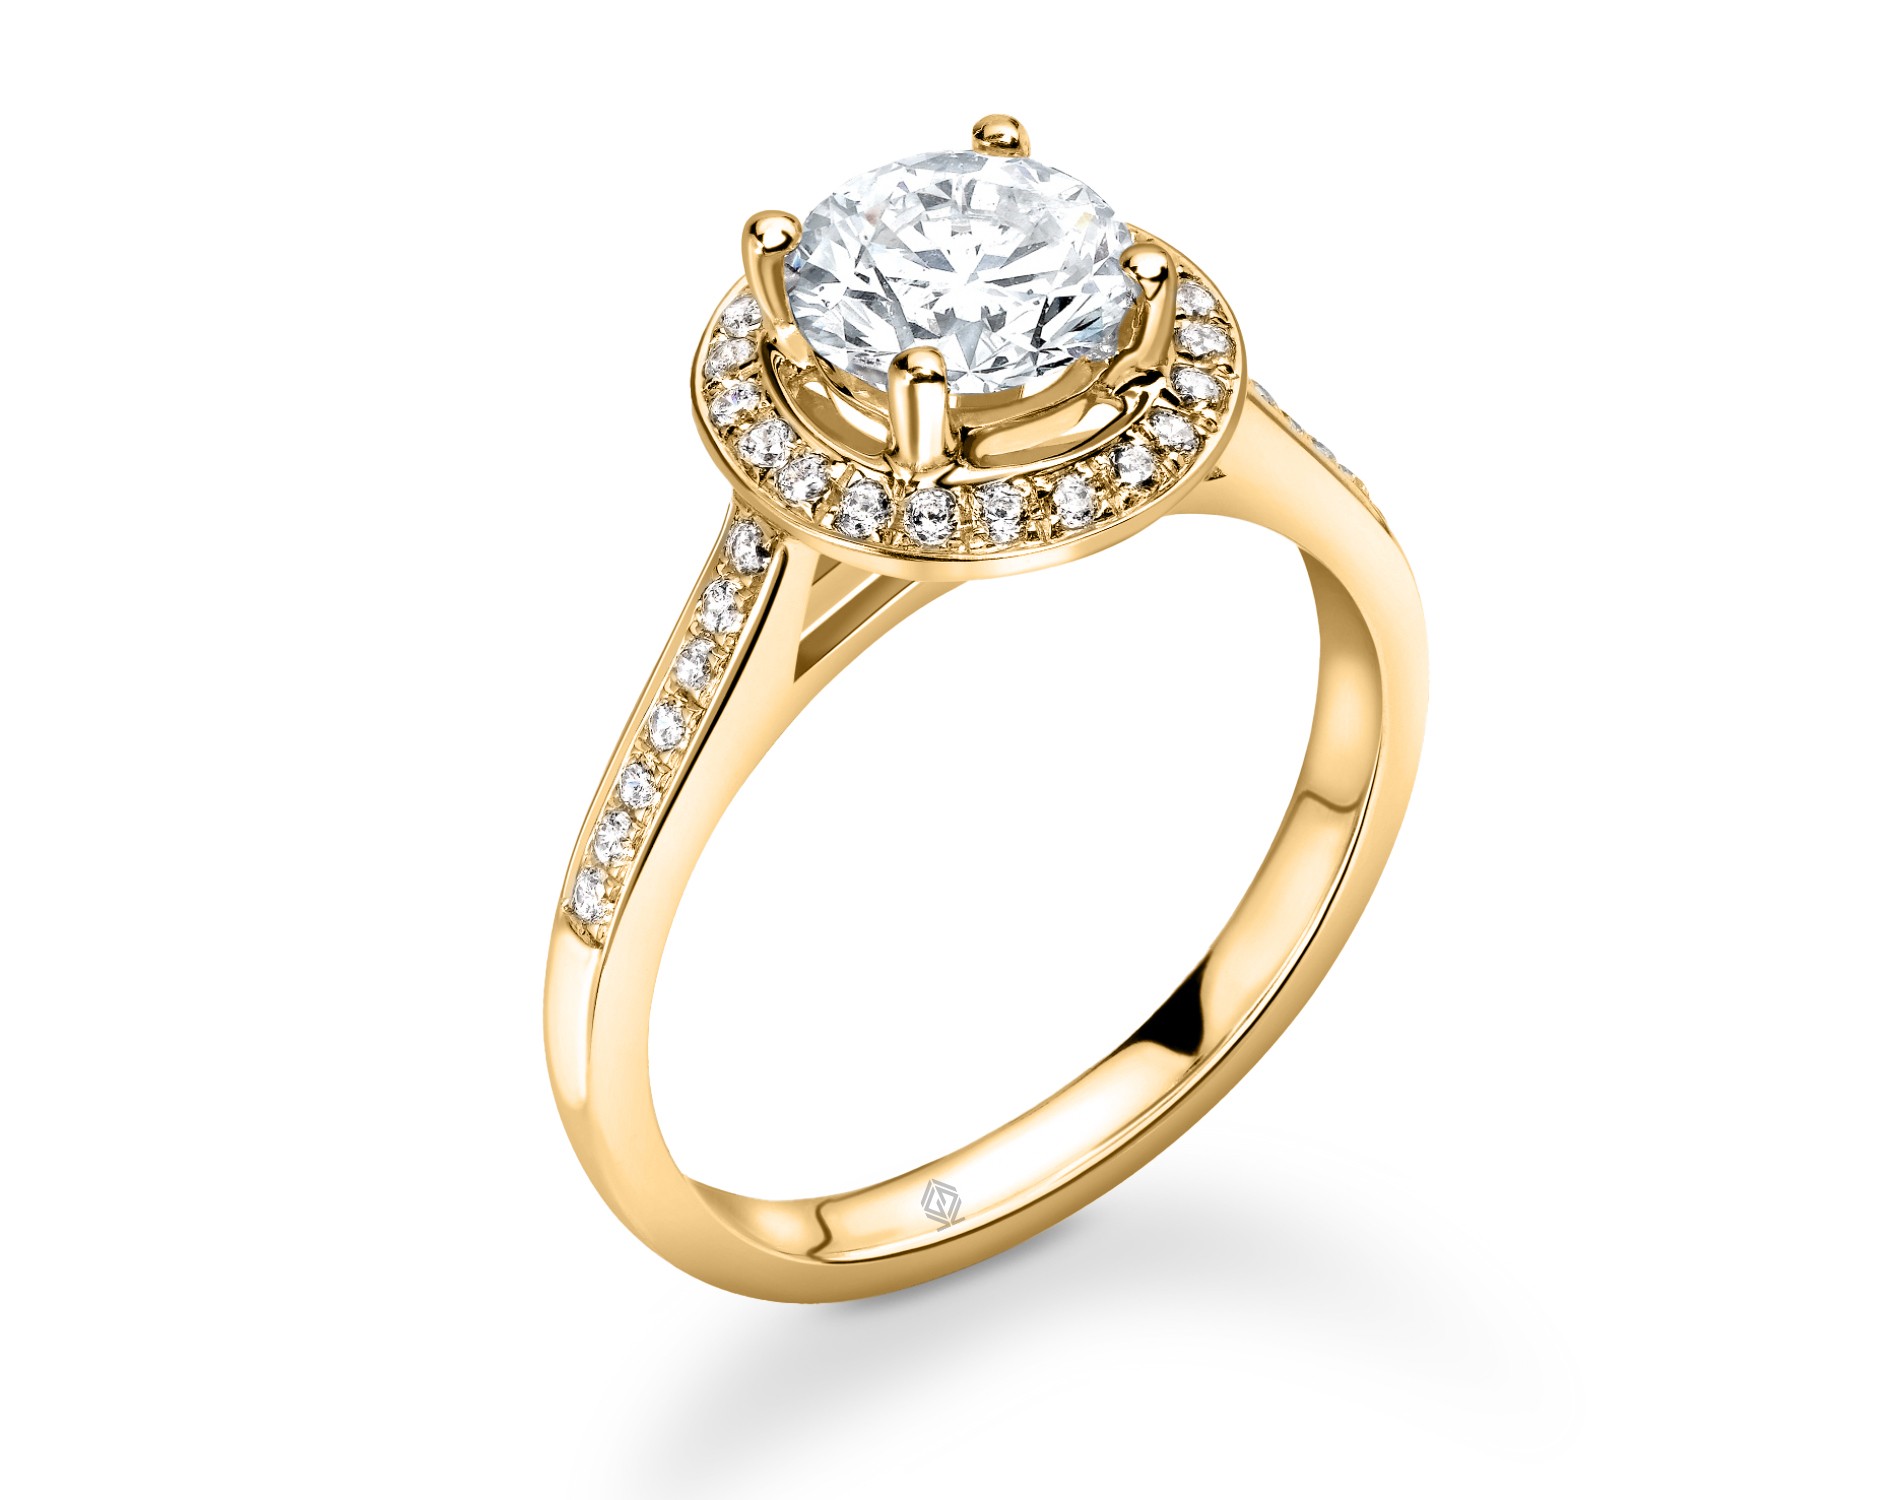 18K YELLOW GOLD HALO ROUND CUT DIAMOND ENGAGEMENT RING WITH SIDE STONES CHANNEL SET